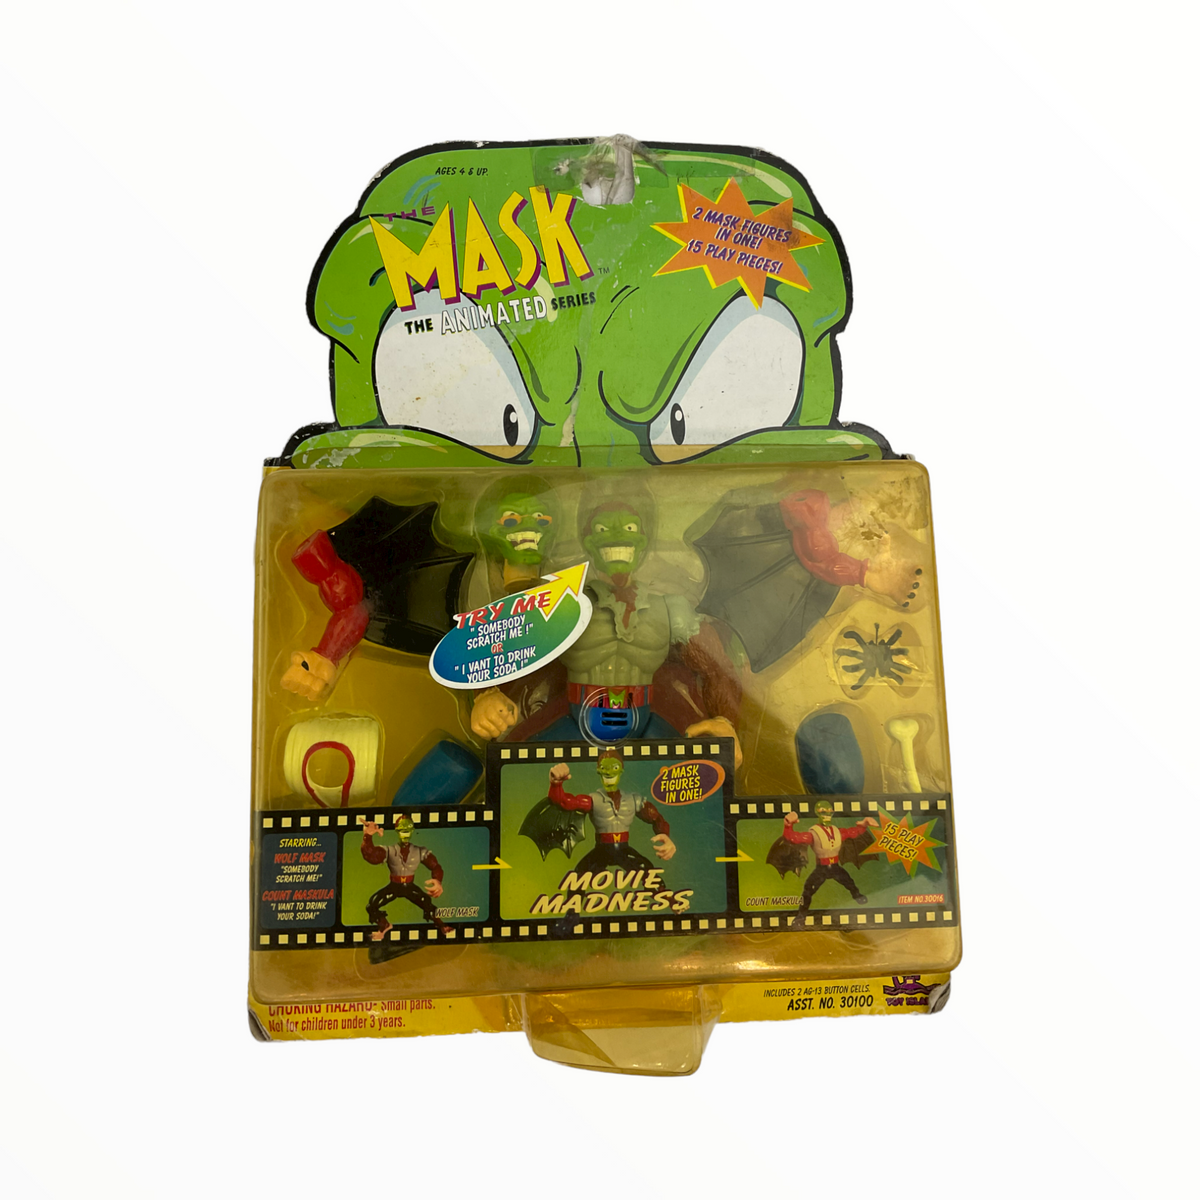 The Mask Animated series movie madness Wolf Mask